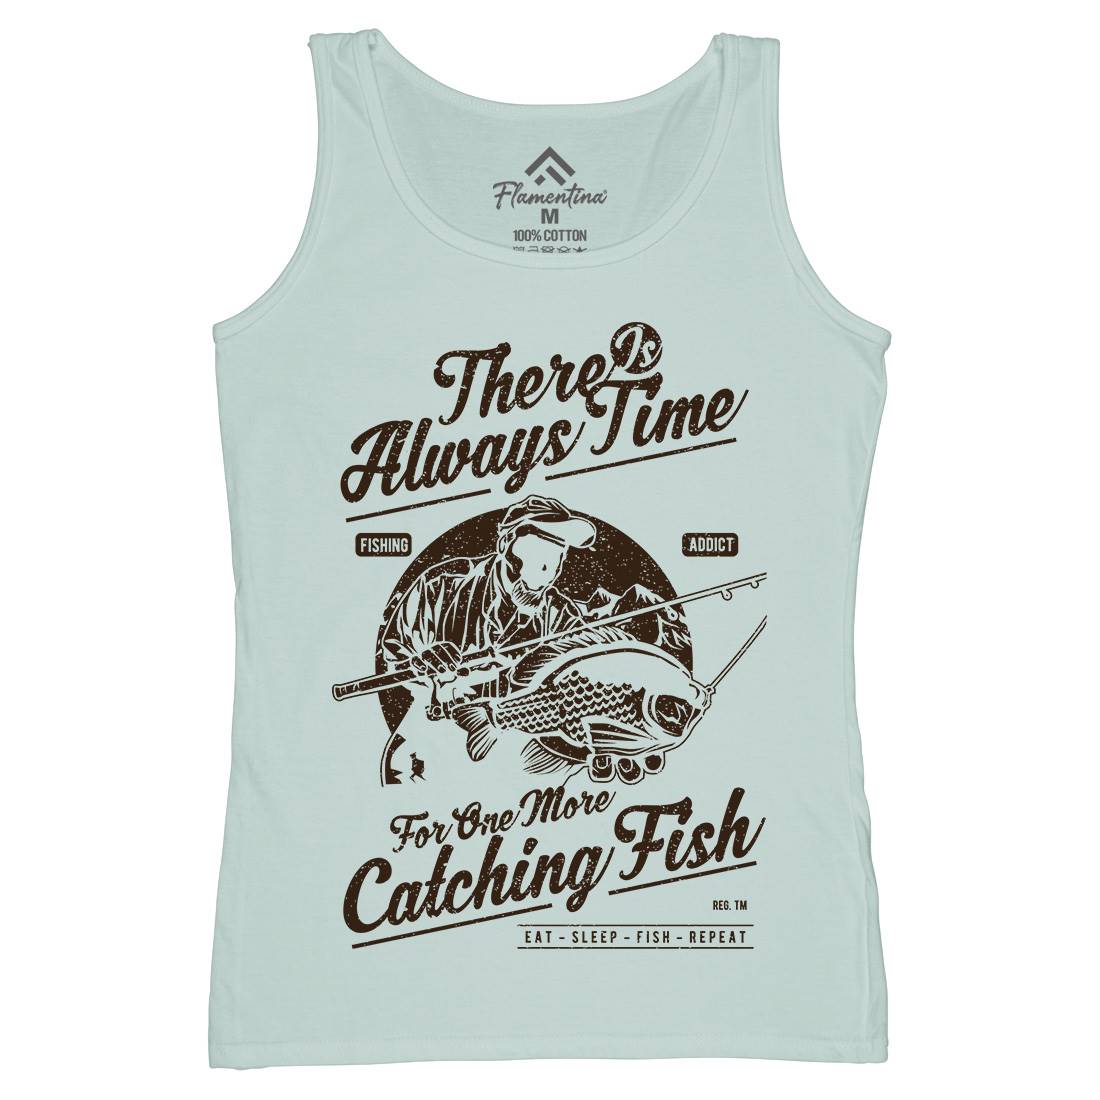 One More Catching Womens Organic Tank Top Vest Fishing A731